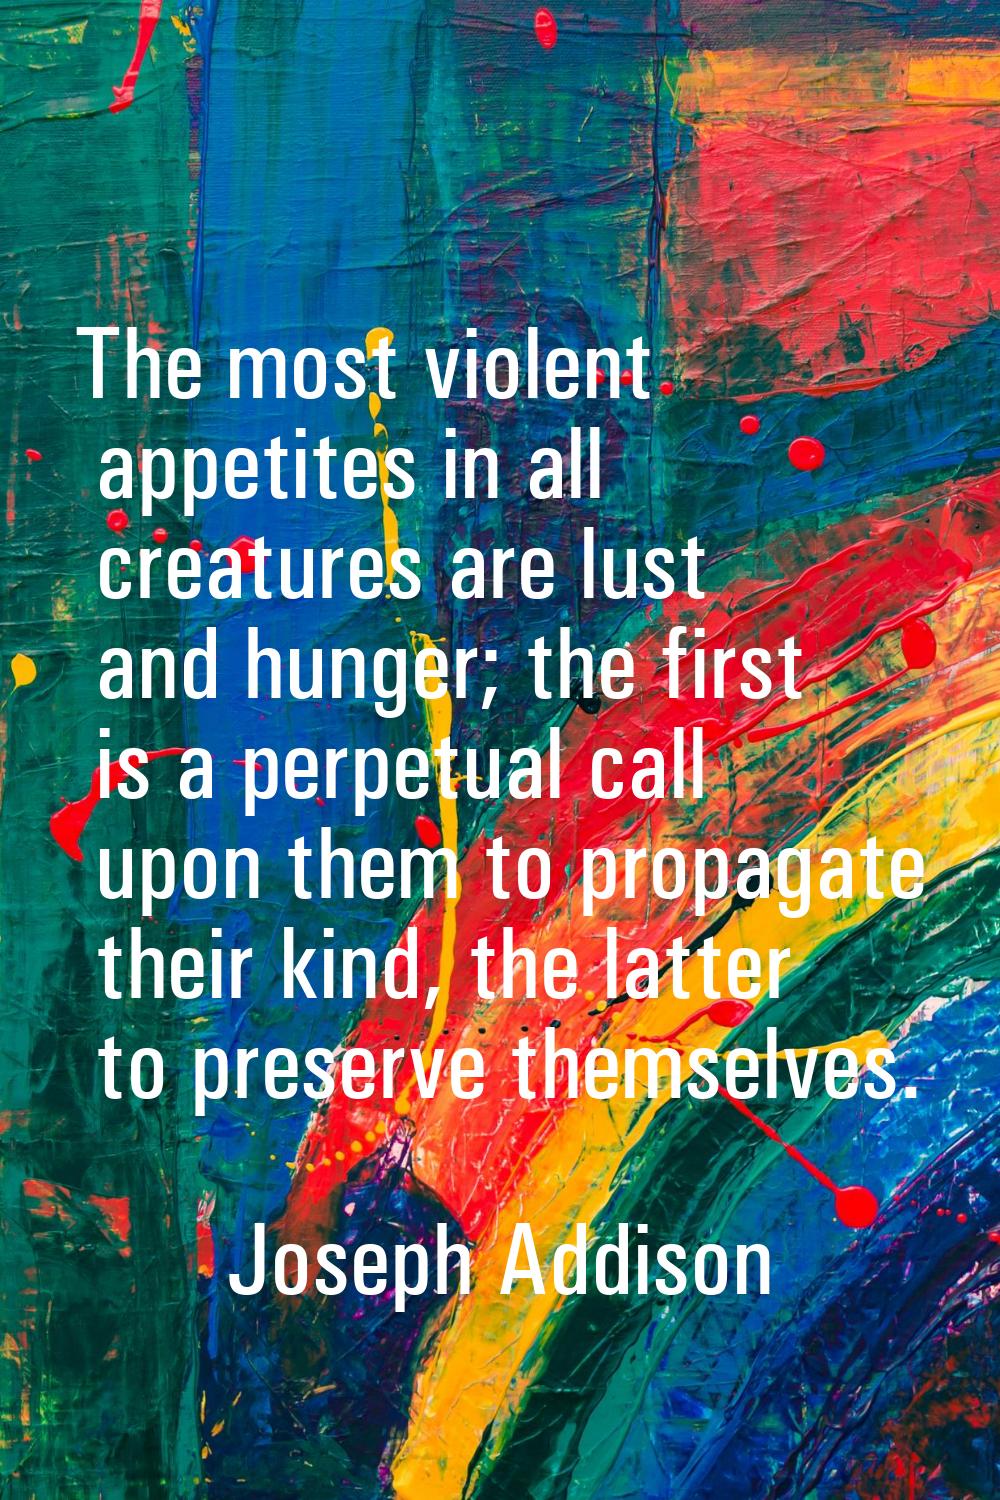 The most violent appetites in all creatures are lust and hunger; the first is a perpetual call upon